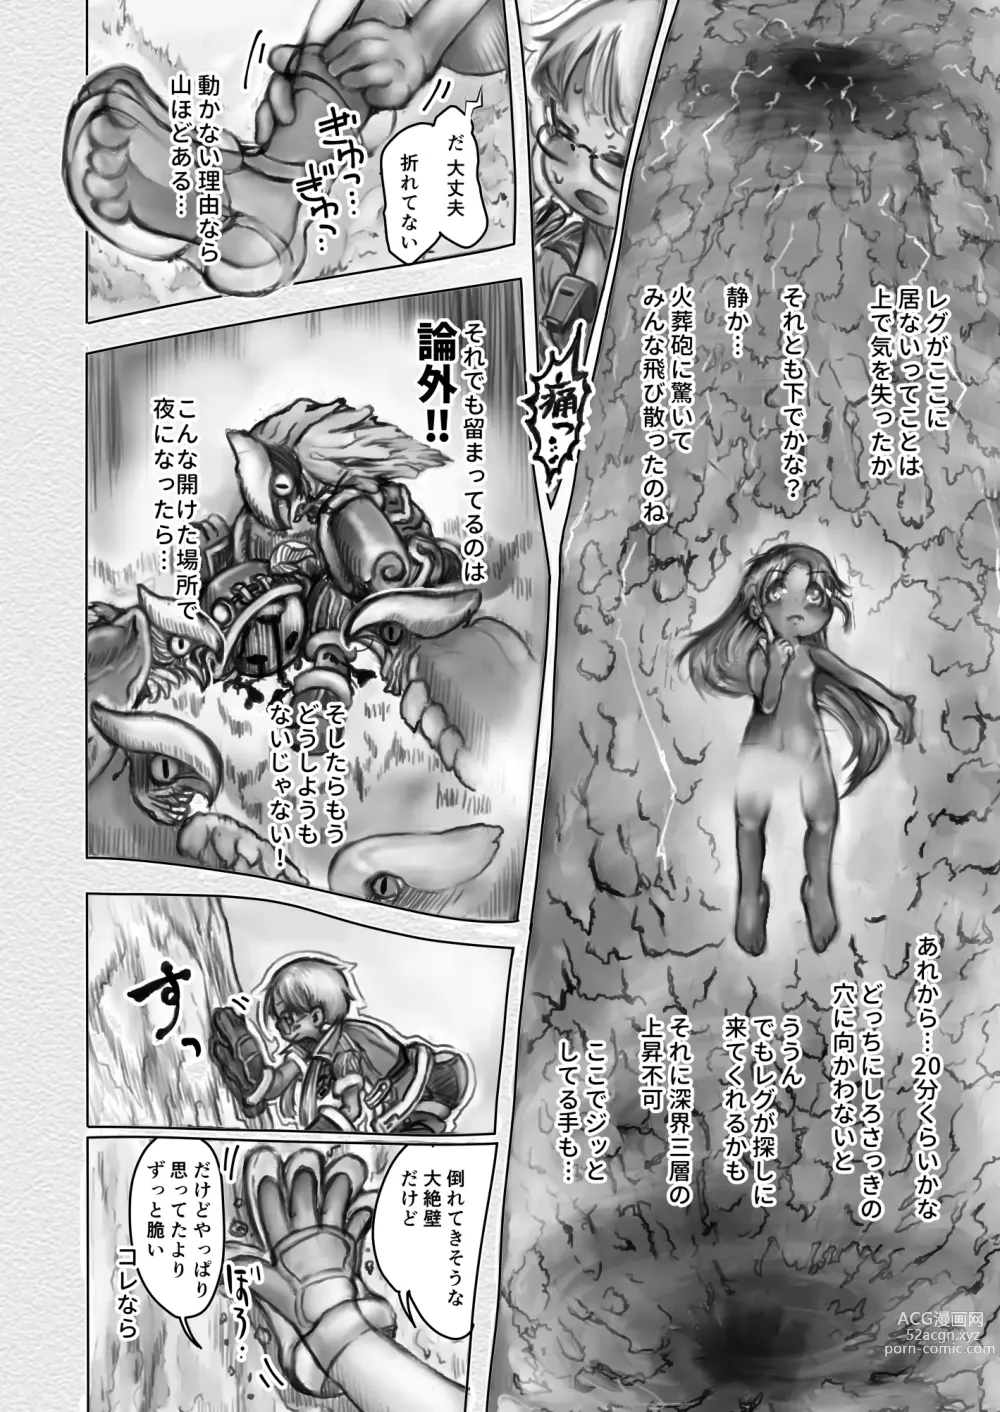 Page 14 of doujinshi Abyss Diver